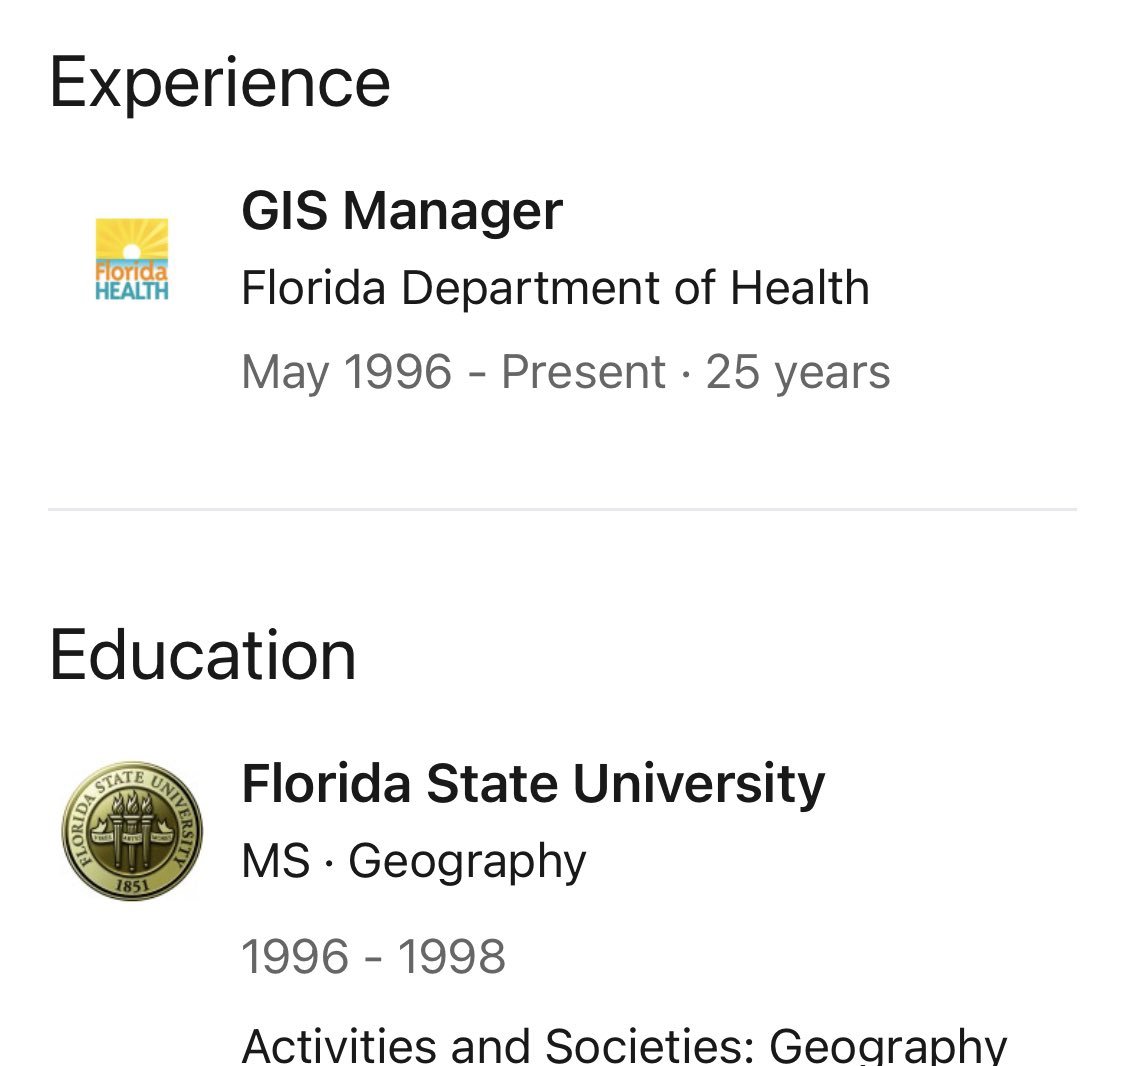 Rebekah Jones says "There was no one else to do my job."Fact check: Jones' title was "GIS Manager." She administered the COVID dashboard.However, Jones was not the only GIS Manager at  @HealthyFla. Chris Duclos, who had been at DOH since 1996, also had admin privileges.